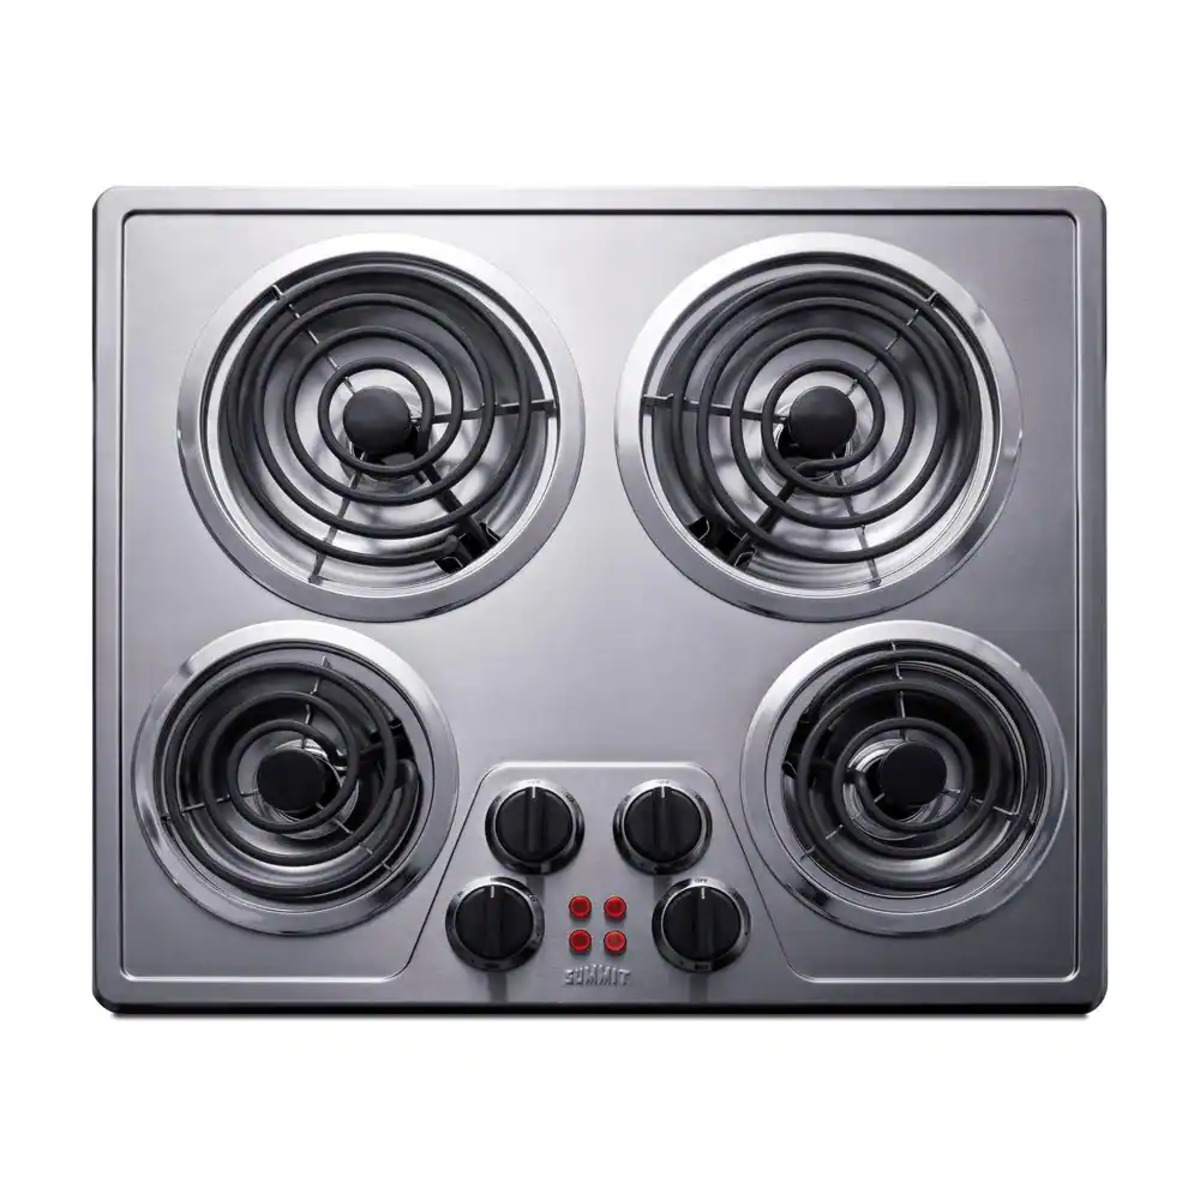 Salton Single Stainless Steel Coil Portable Electric Cooktop, 1.36 kg,  Stainless